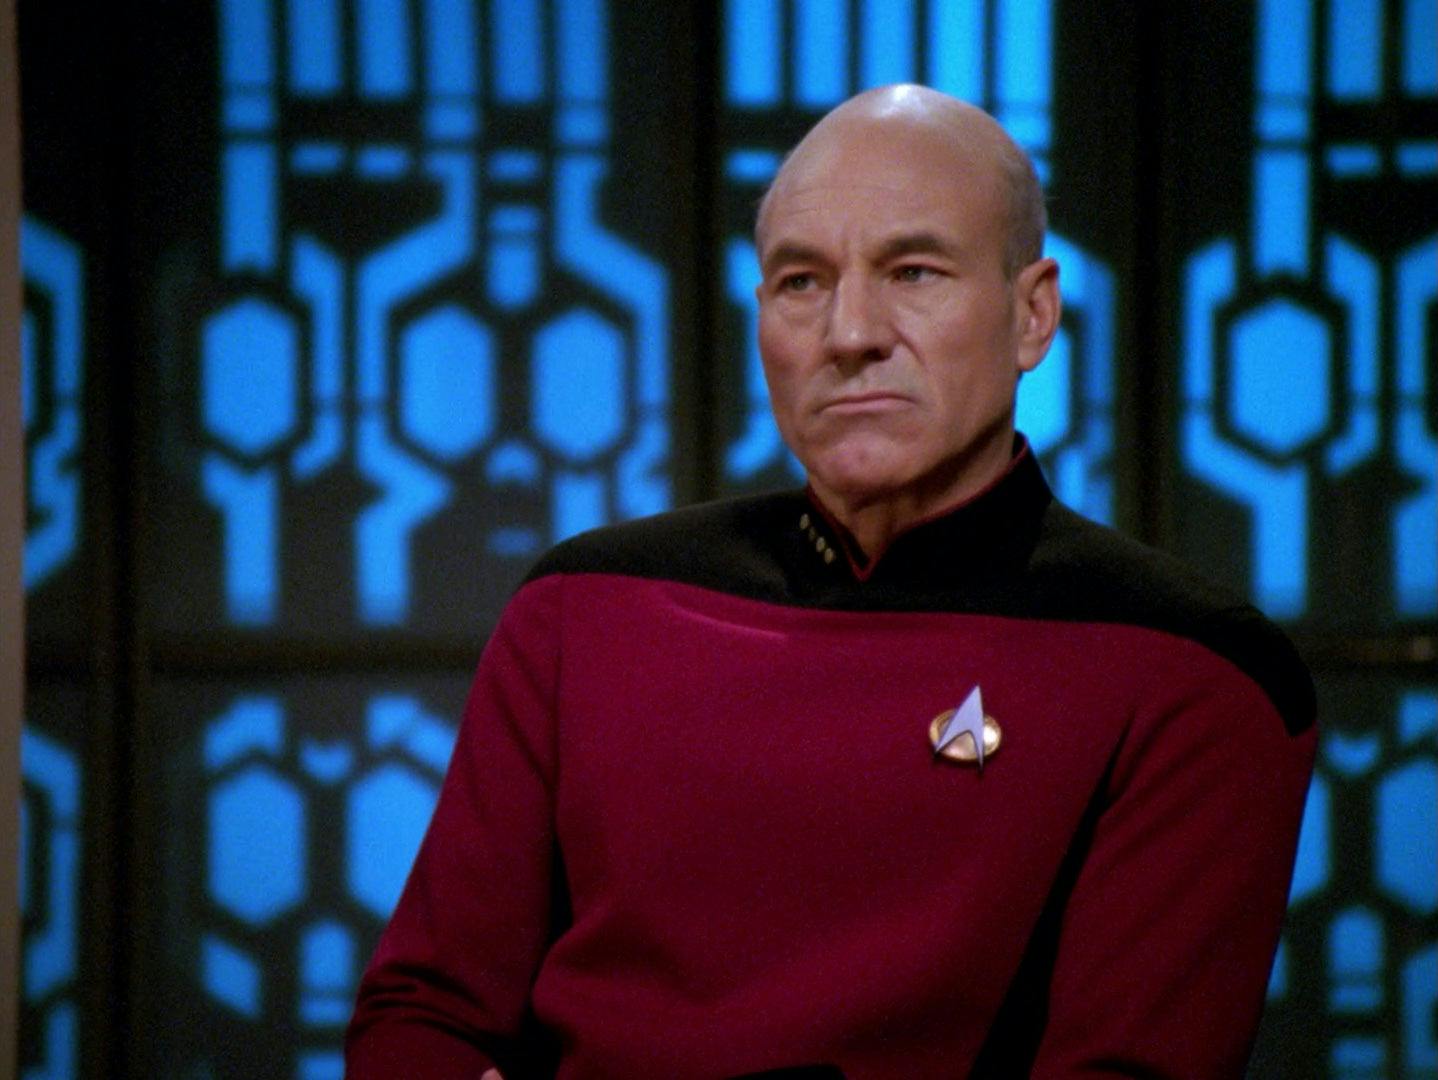 Picard sits in contempt of the court.